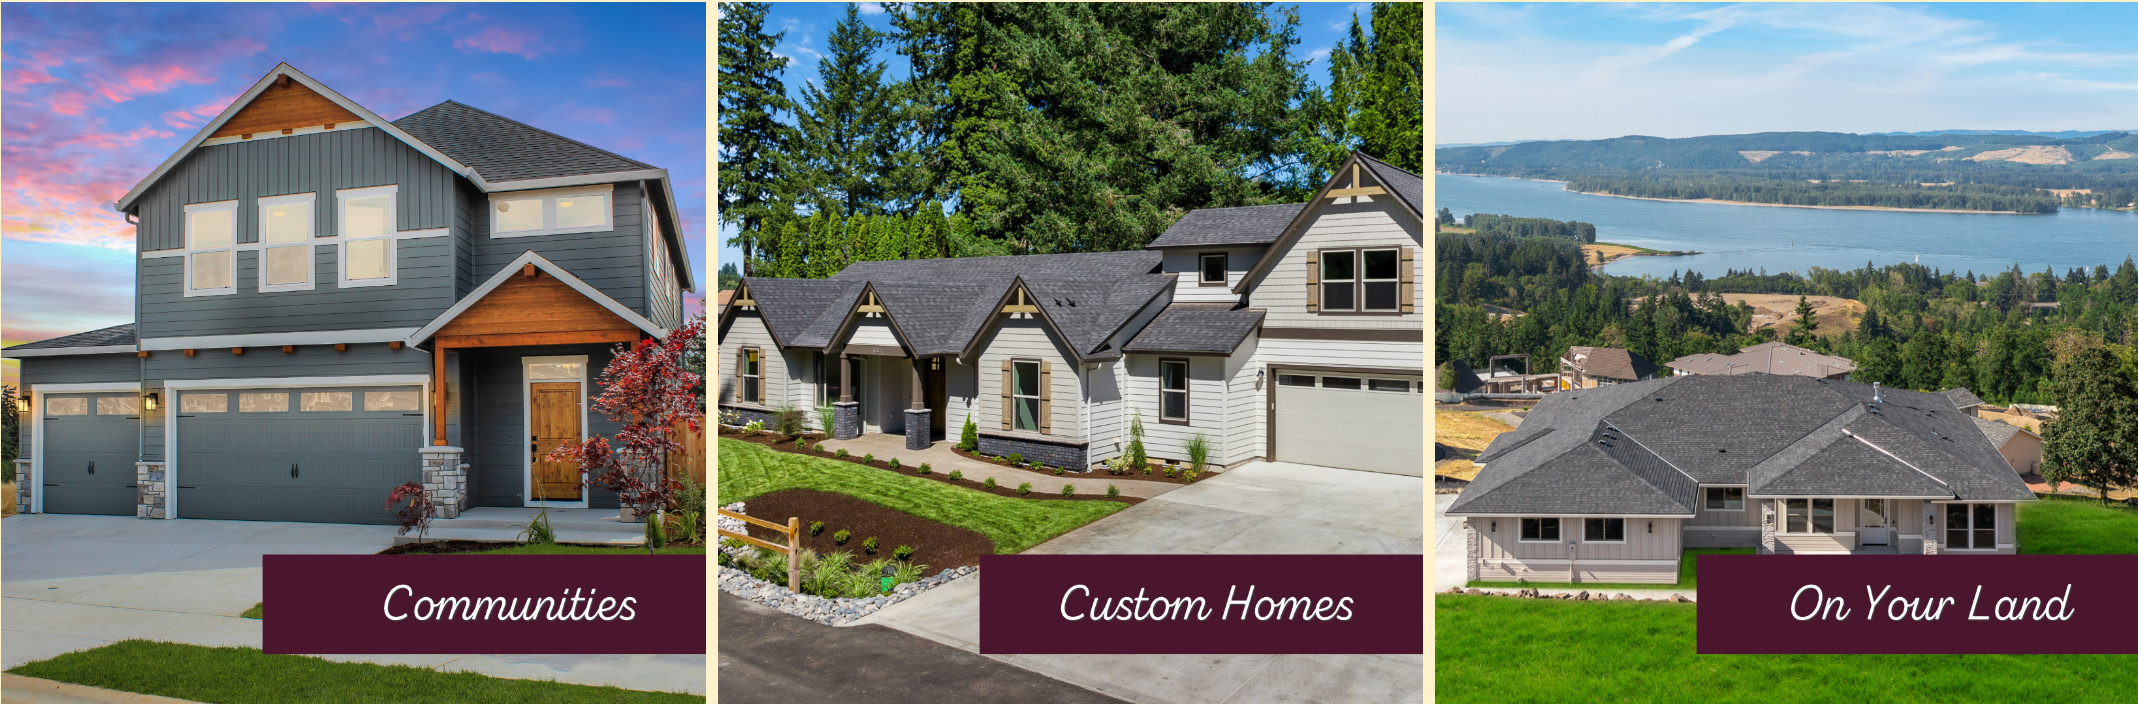 Urban NW new home communities and custom homes built on your land in Clark County 